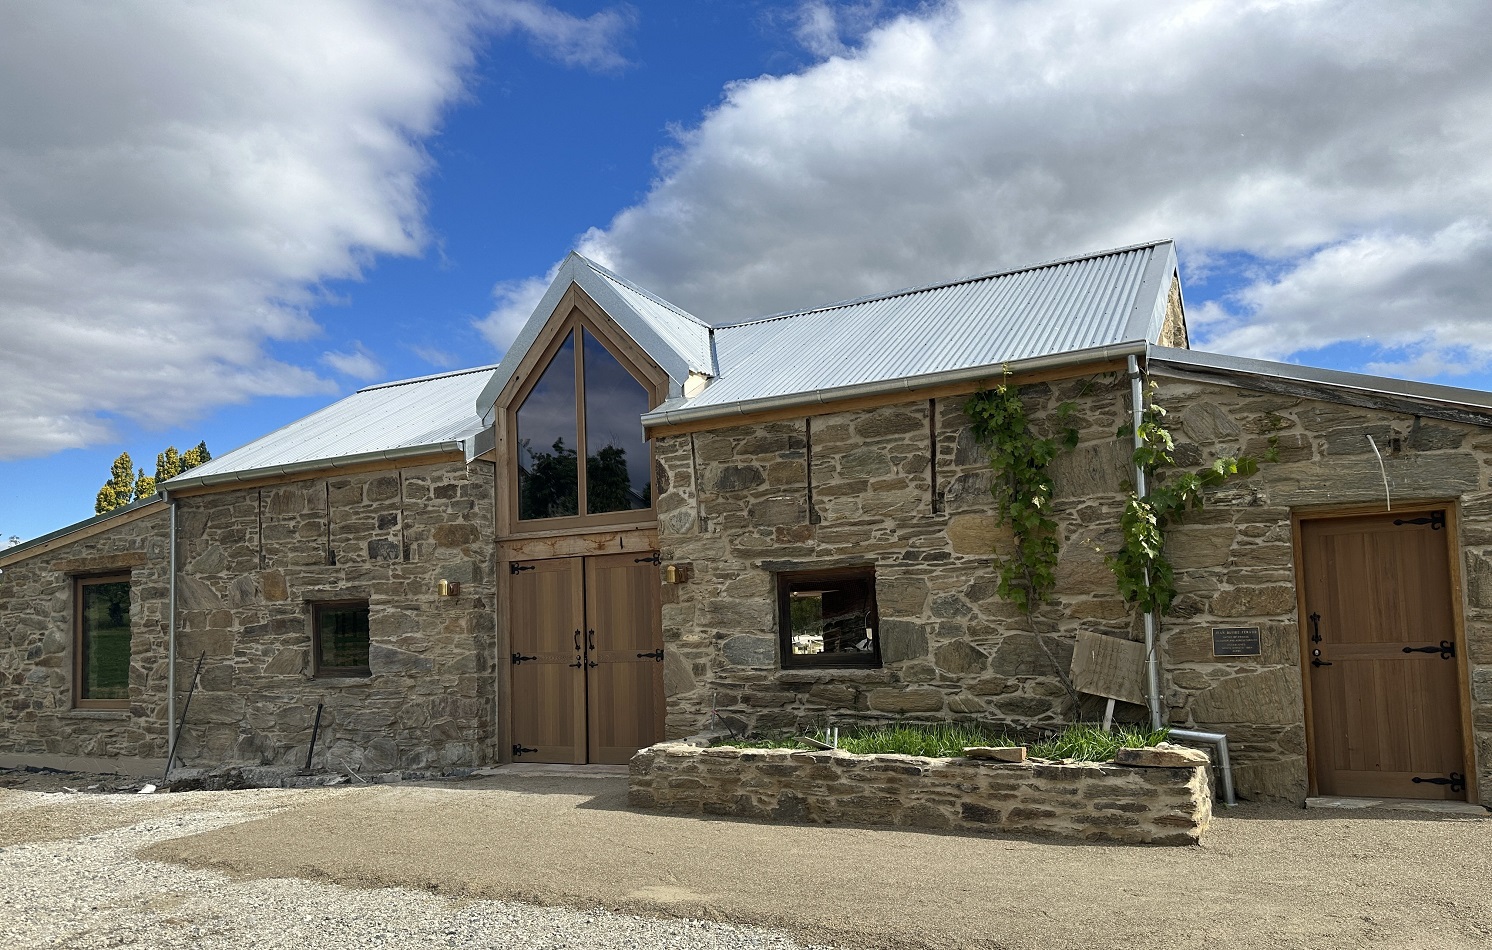 The original Monte Christo Winery has been brought back to life as a cellar door.